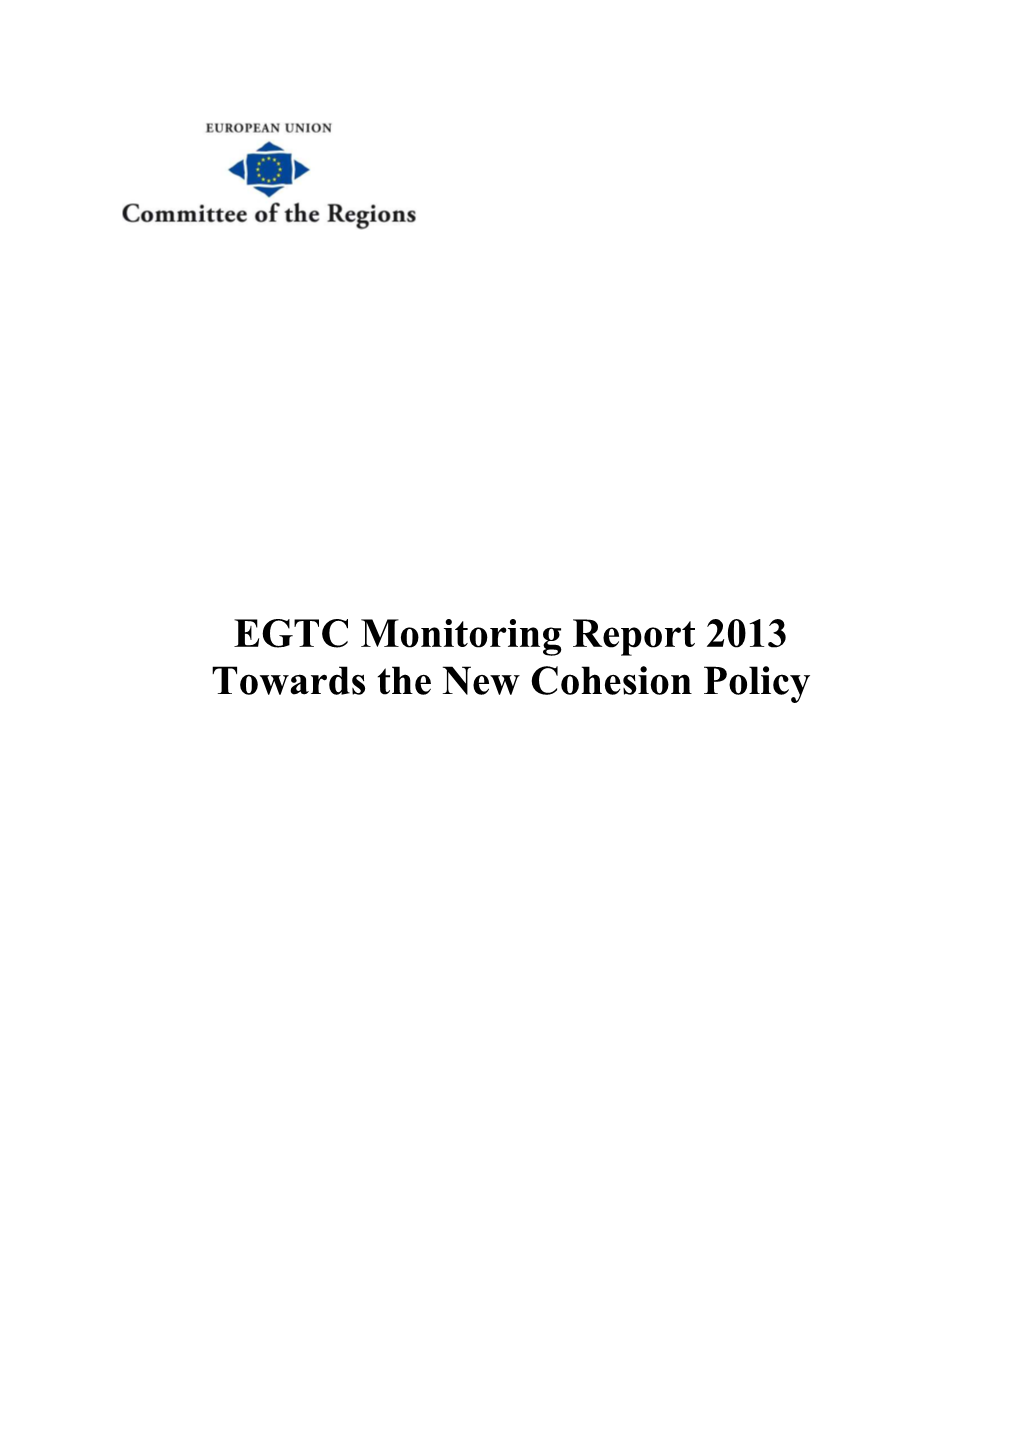 EGTC Monitoring Report 2013 Towards the New Cohesion Policy